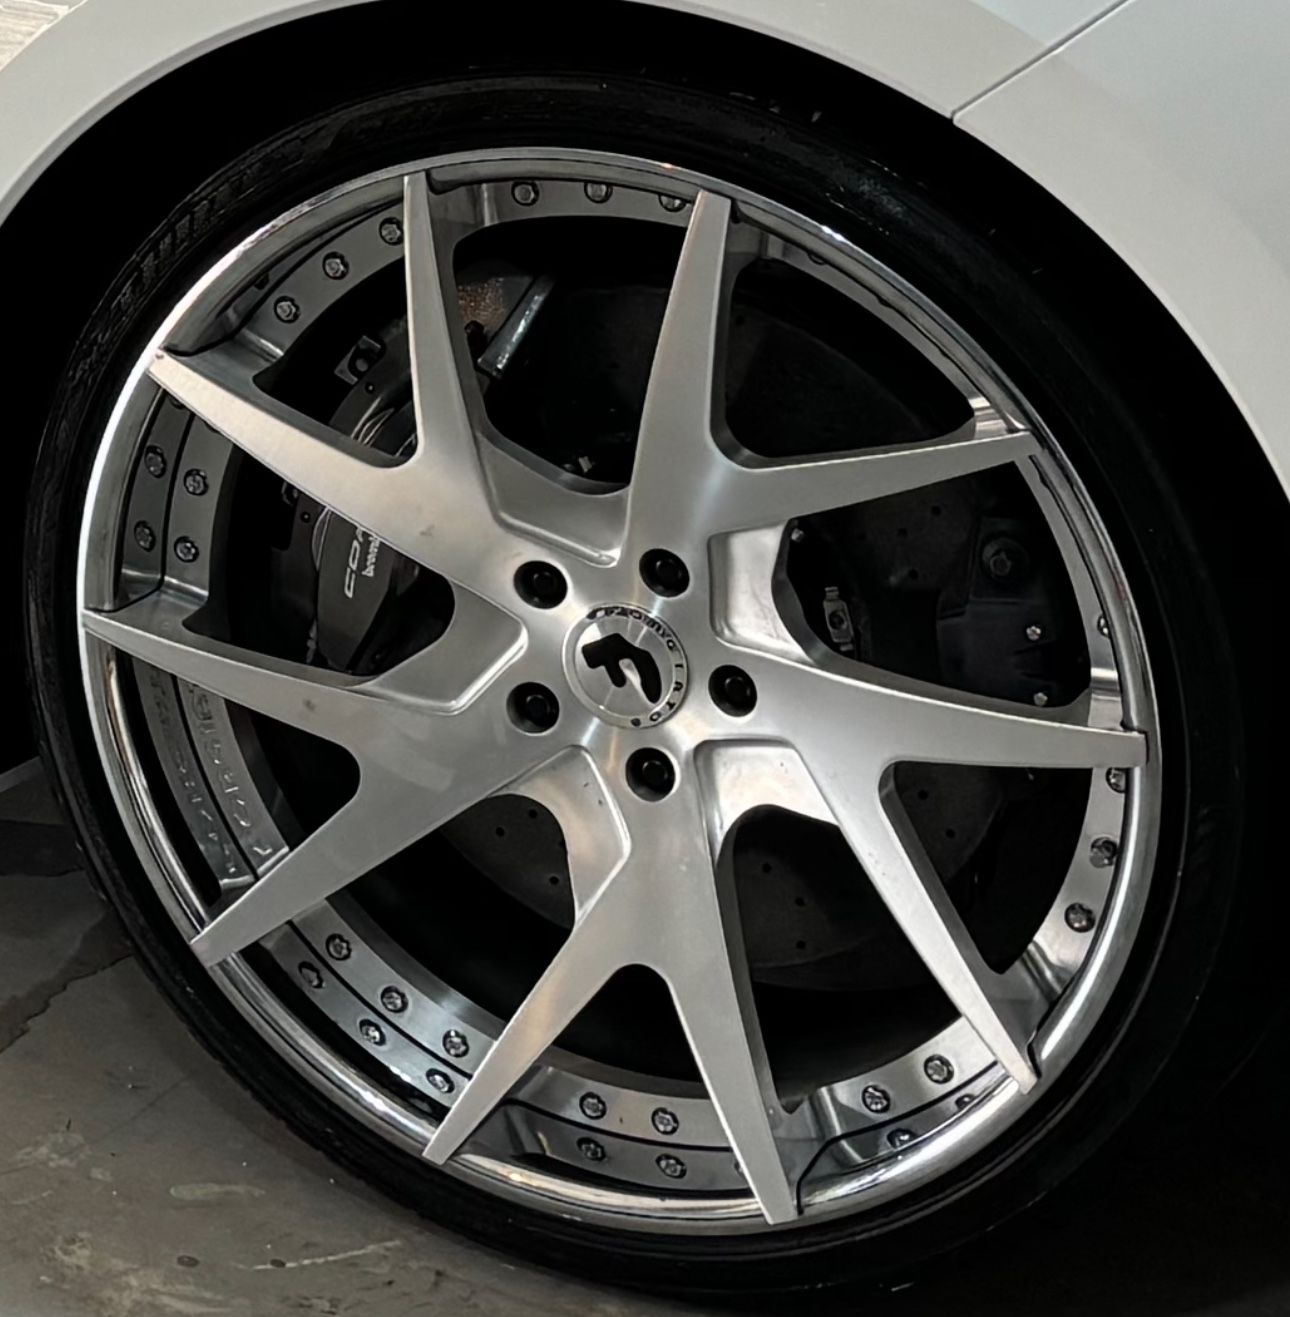 21/22 Forgiato ECL Wheels For Chevy C8 Corvette or similar Vehicles With 5x120 Bolt Pattern 